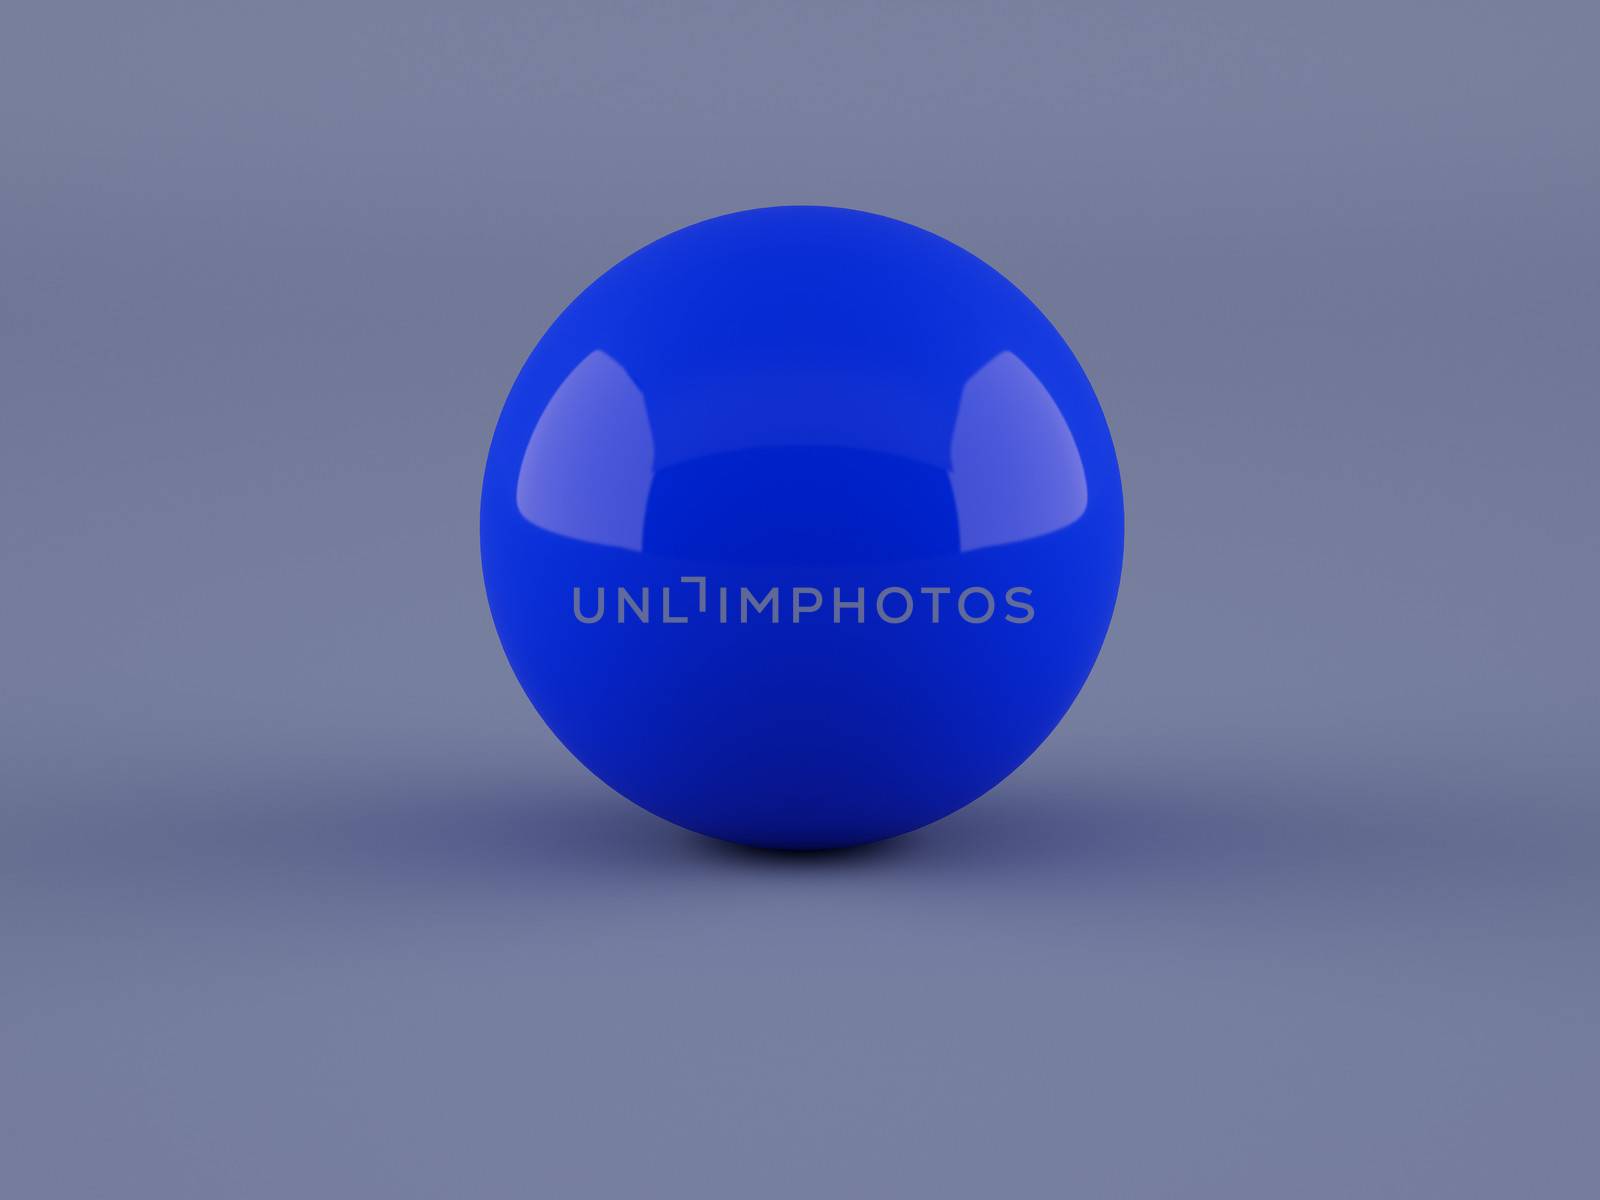 High resolution image. 3d rendered illustration. Sphere. Abstract background.